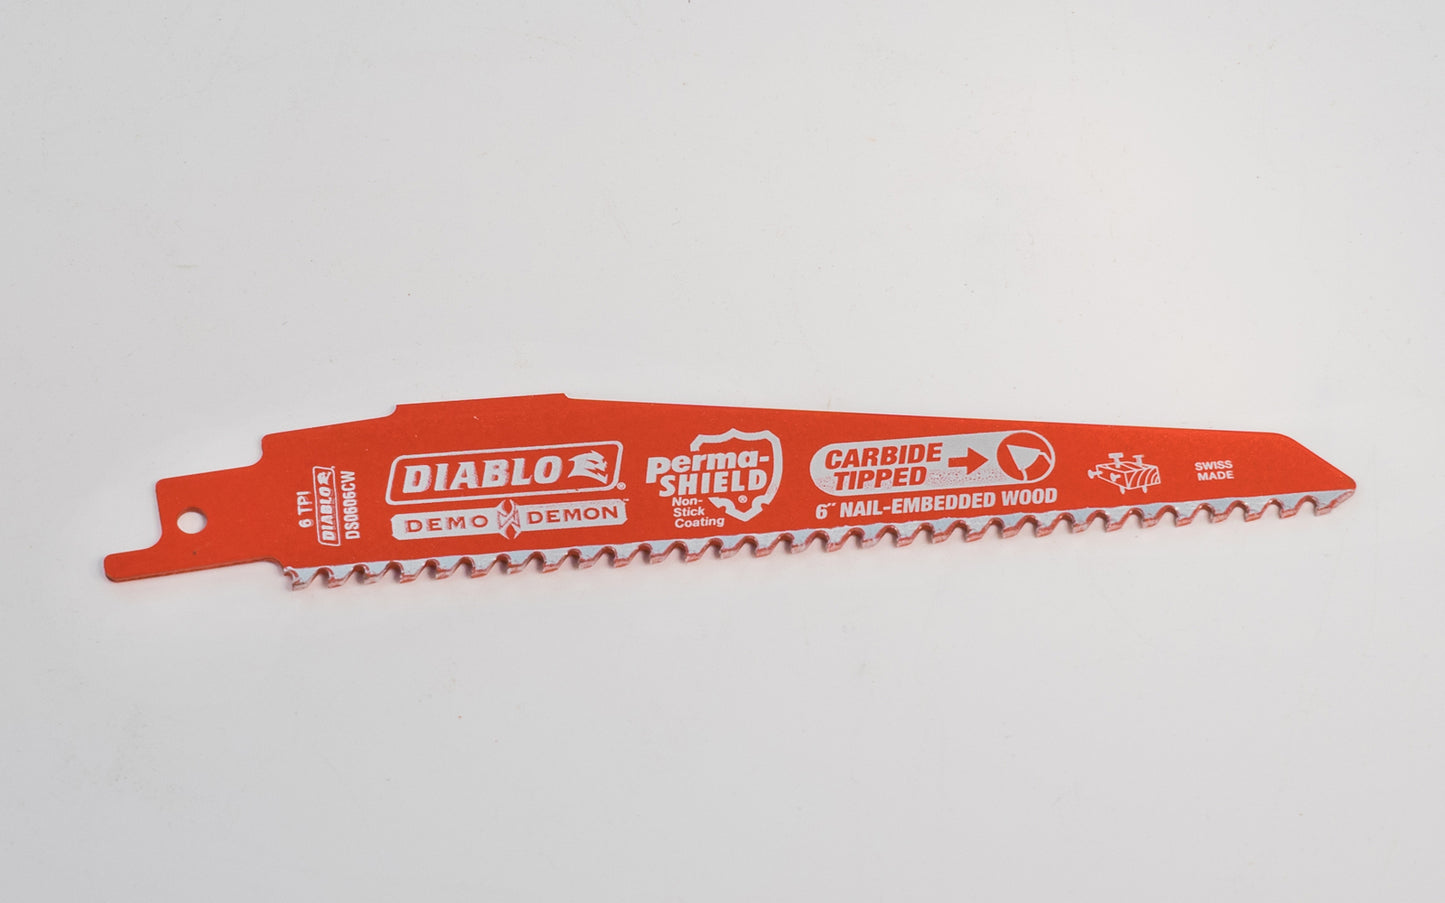 Diablo 6" Carbide Tipped Reciprocating Saw Blade - 6 TPI. Model DS0606CW. Swiss made.